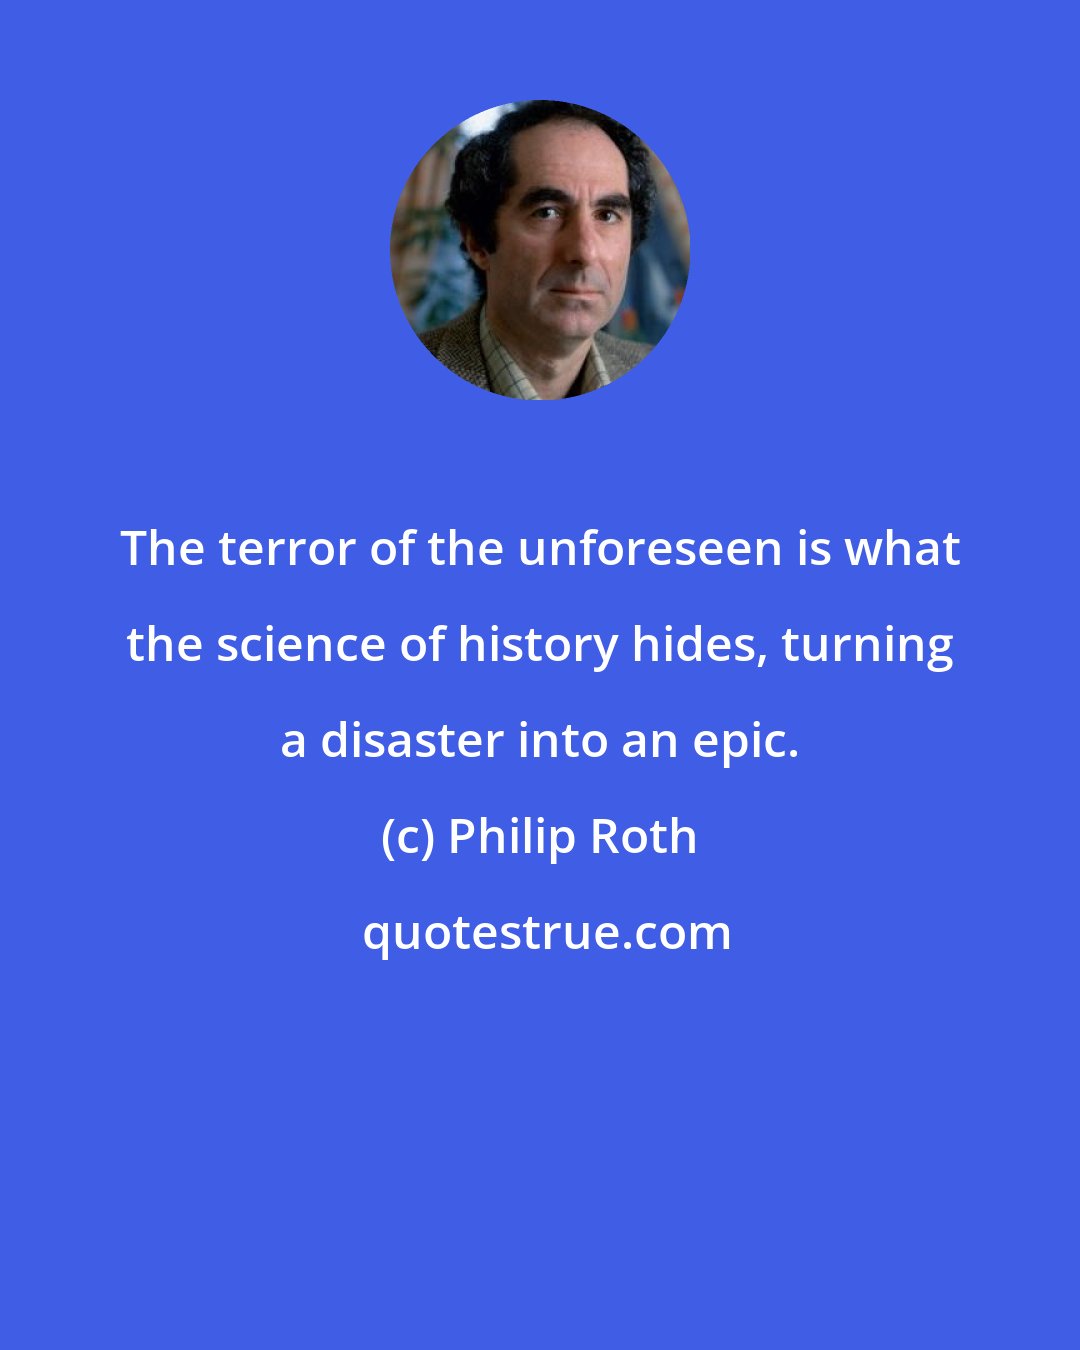 Philip Roth: The terror of the unforeseen is what the science of history hides, turning a disaster into an epic.